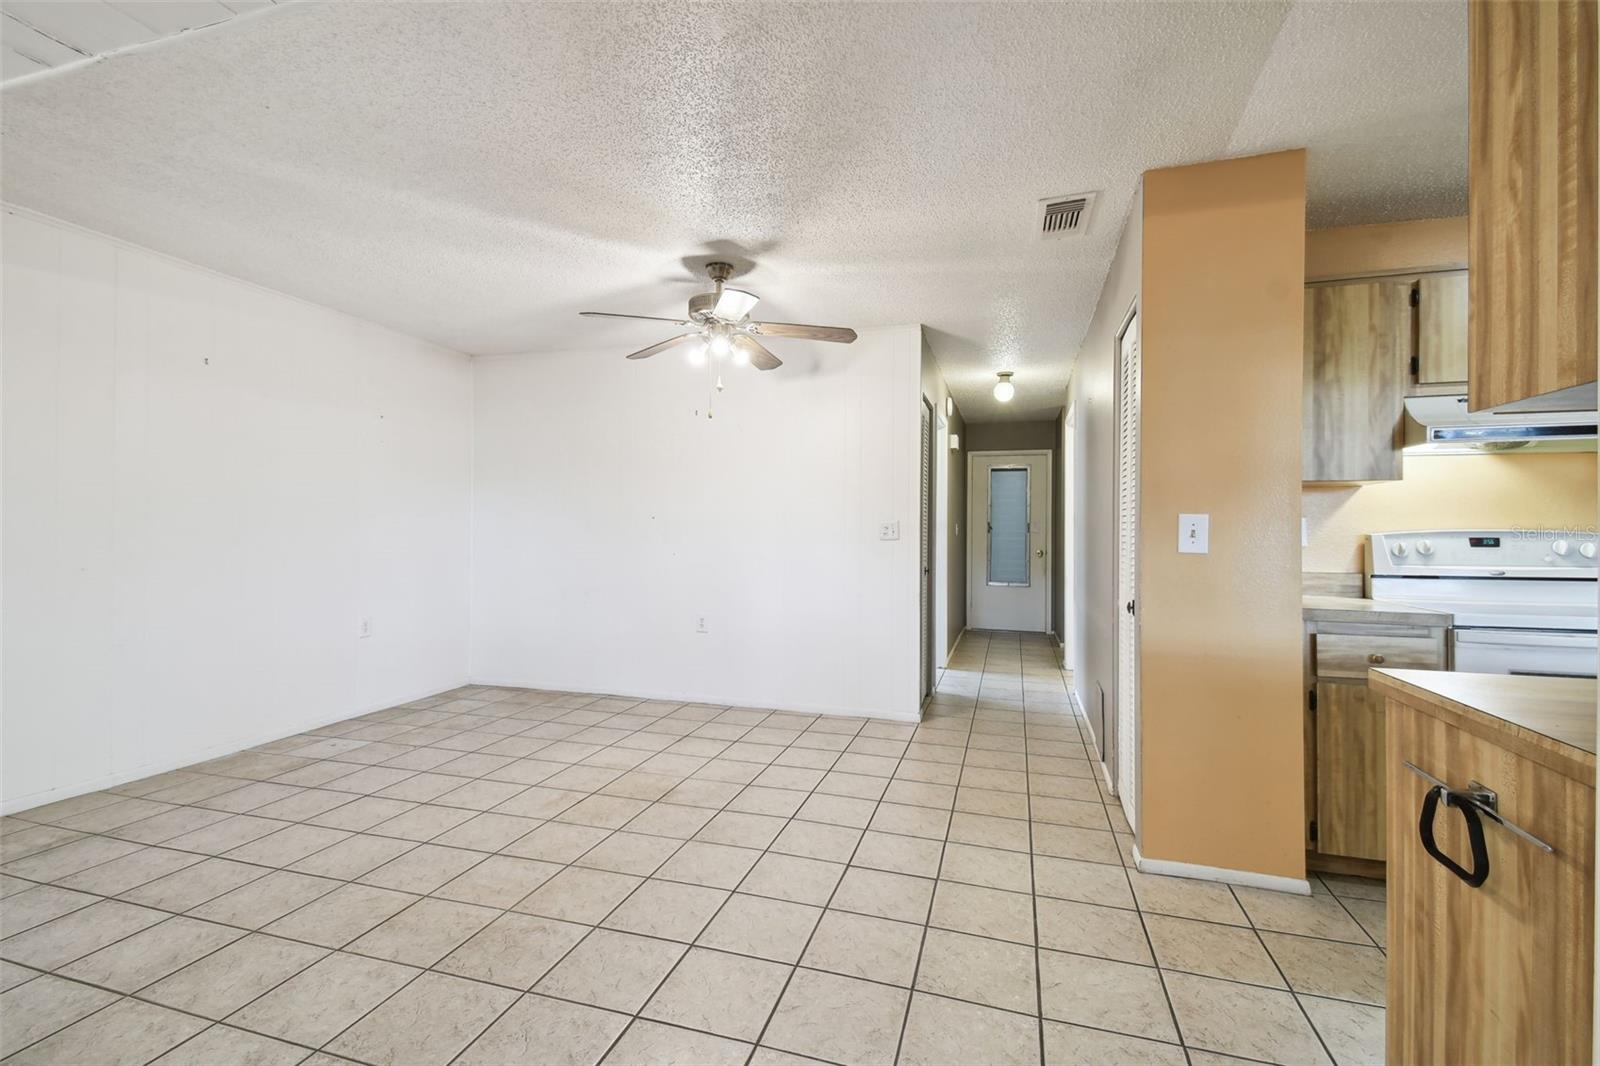 Dinning/Great Room, Pantry/Kitchen